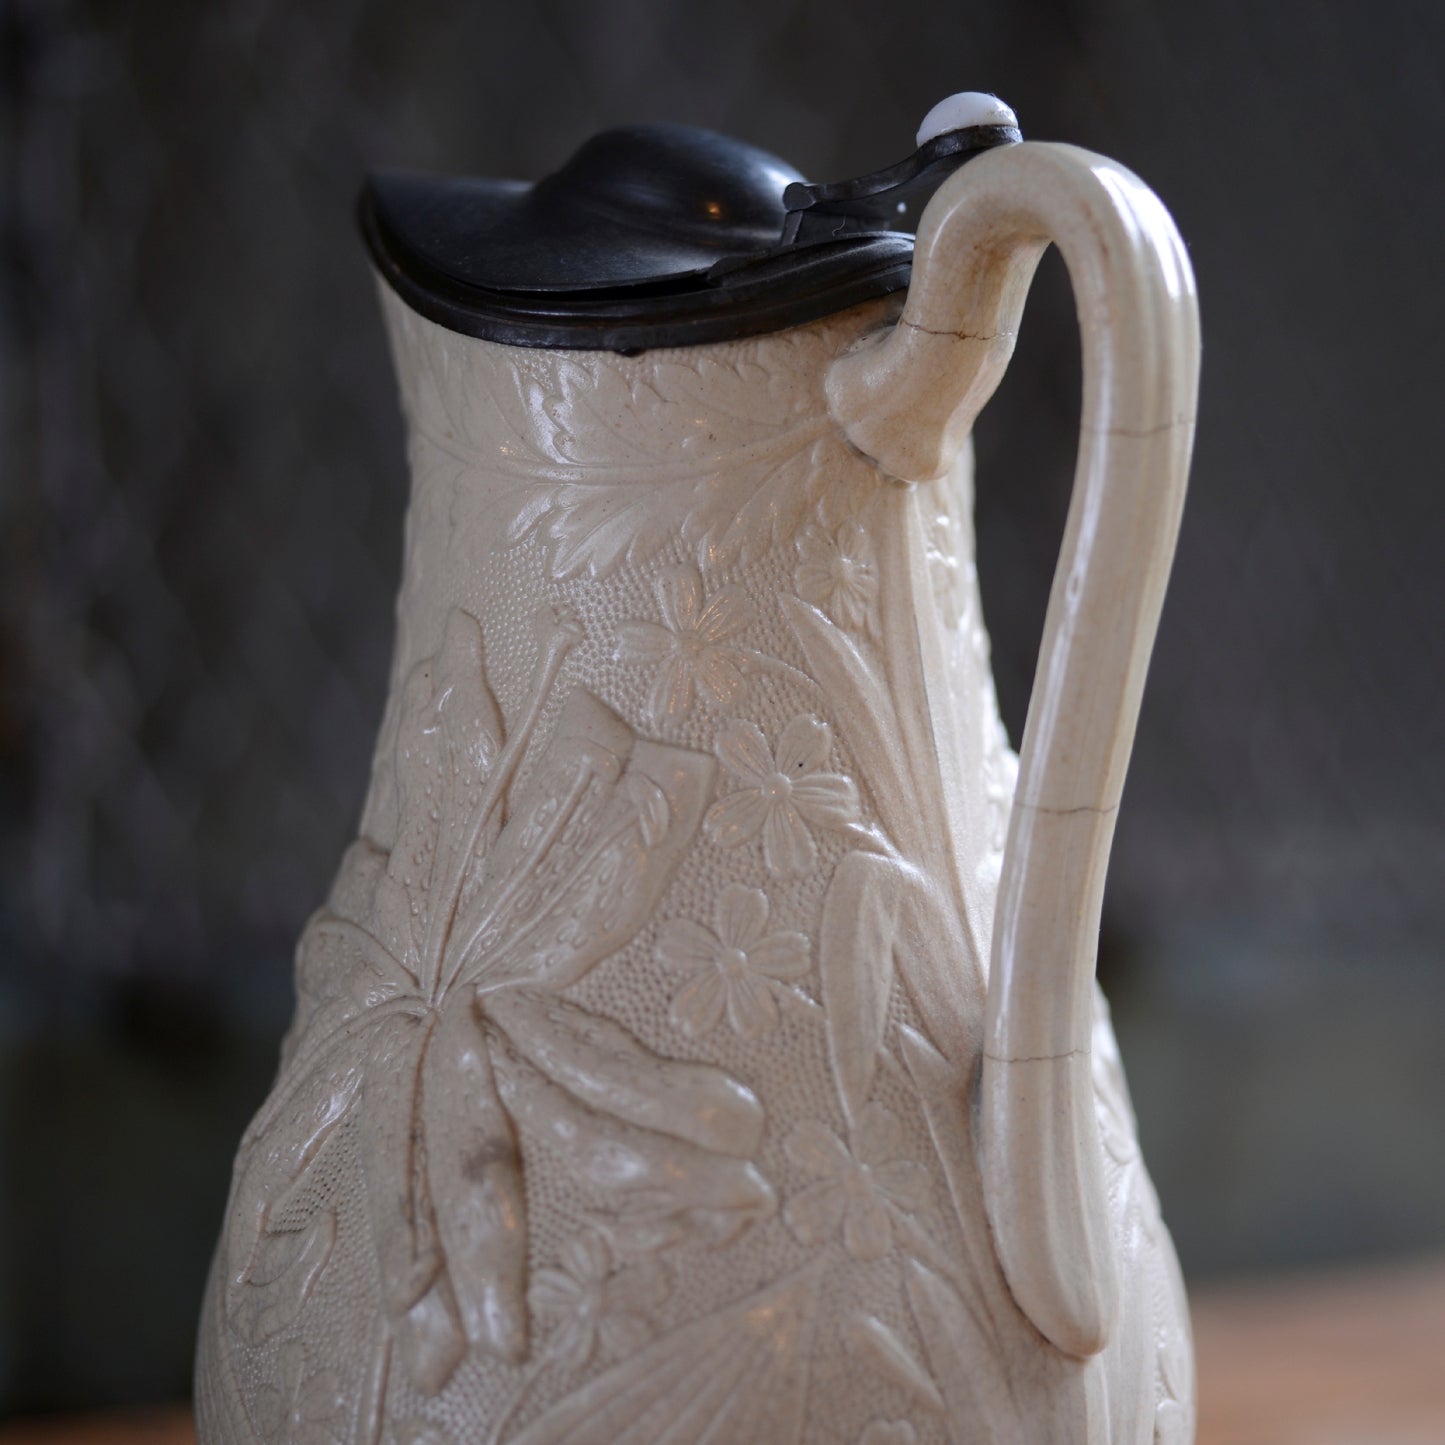 Dudson relief Tiger Lily Creamware Pitcher